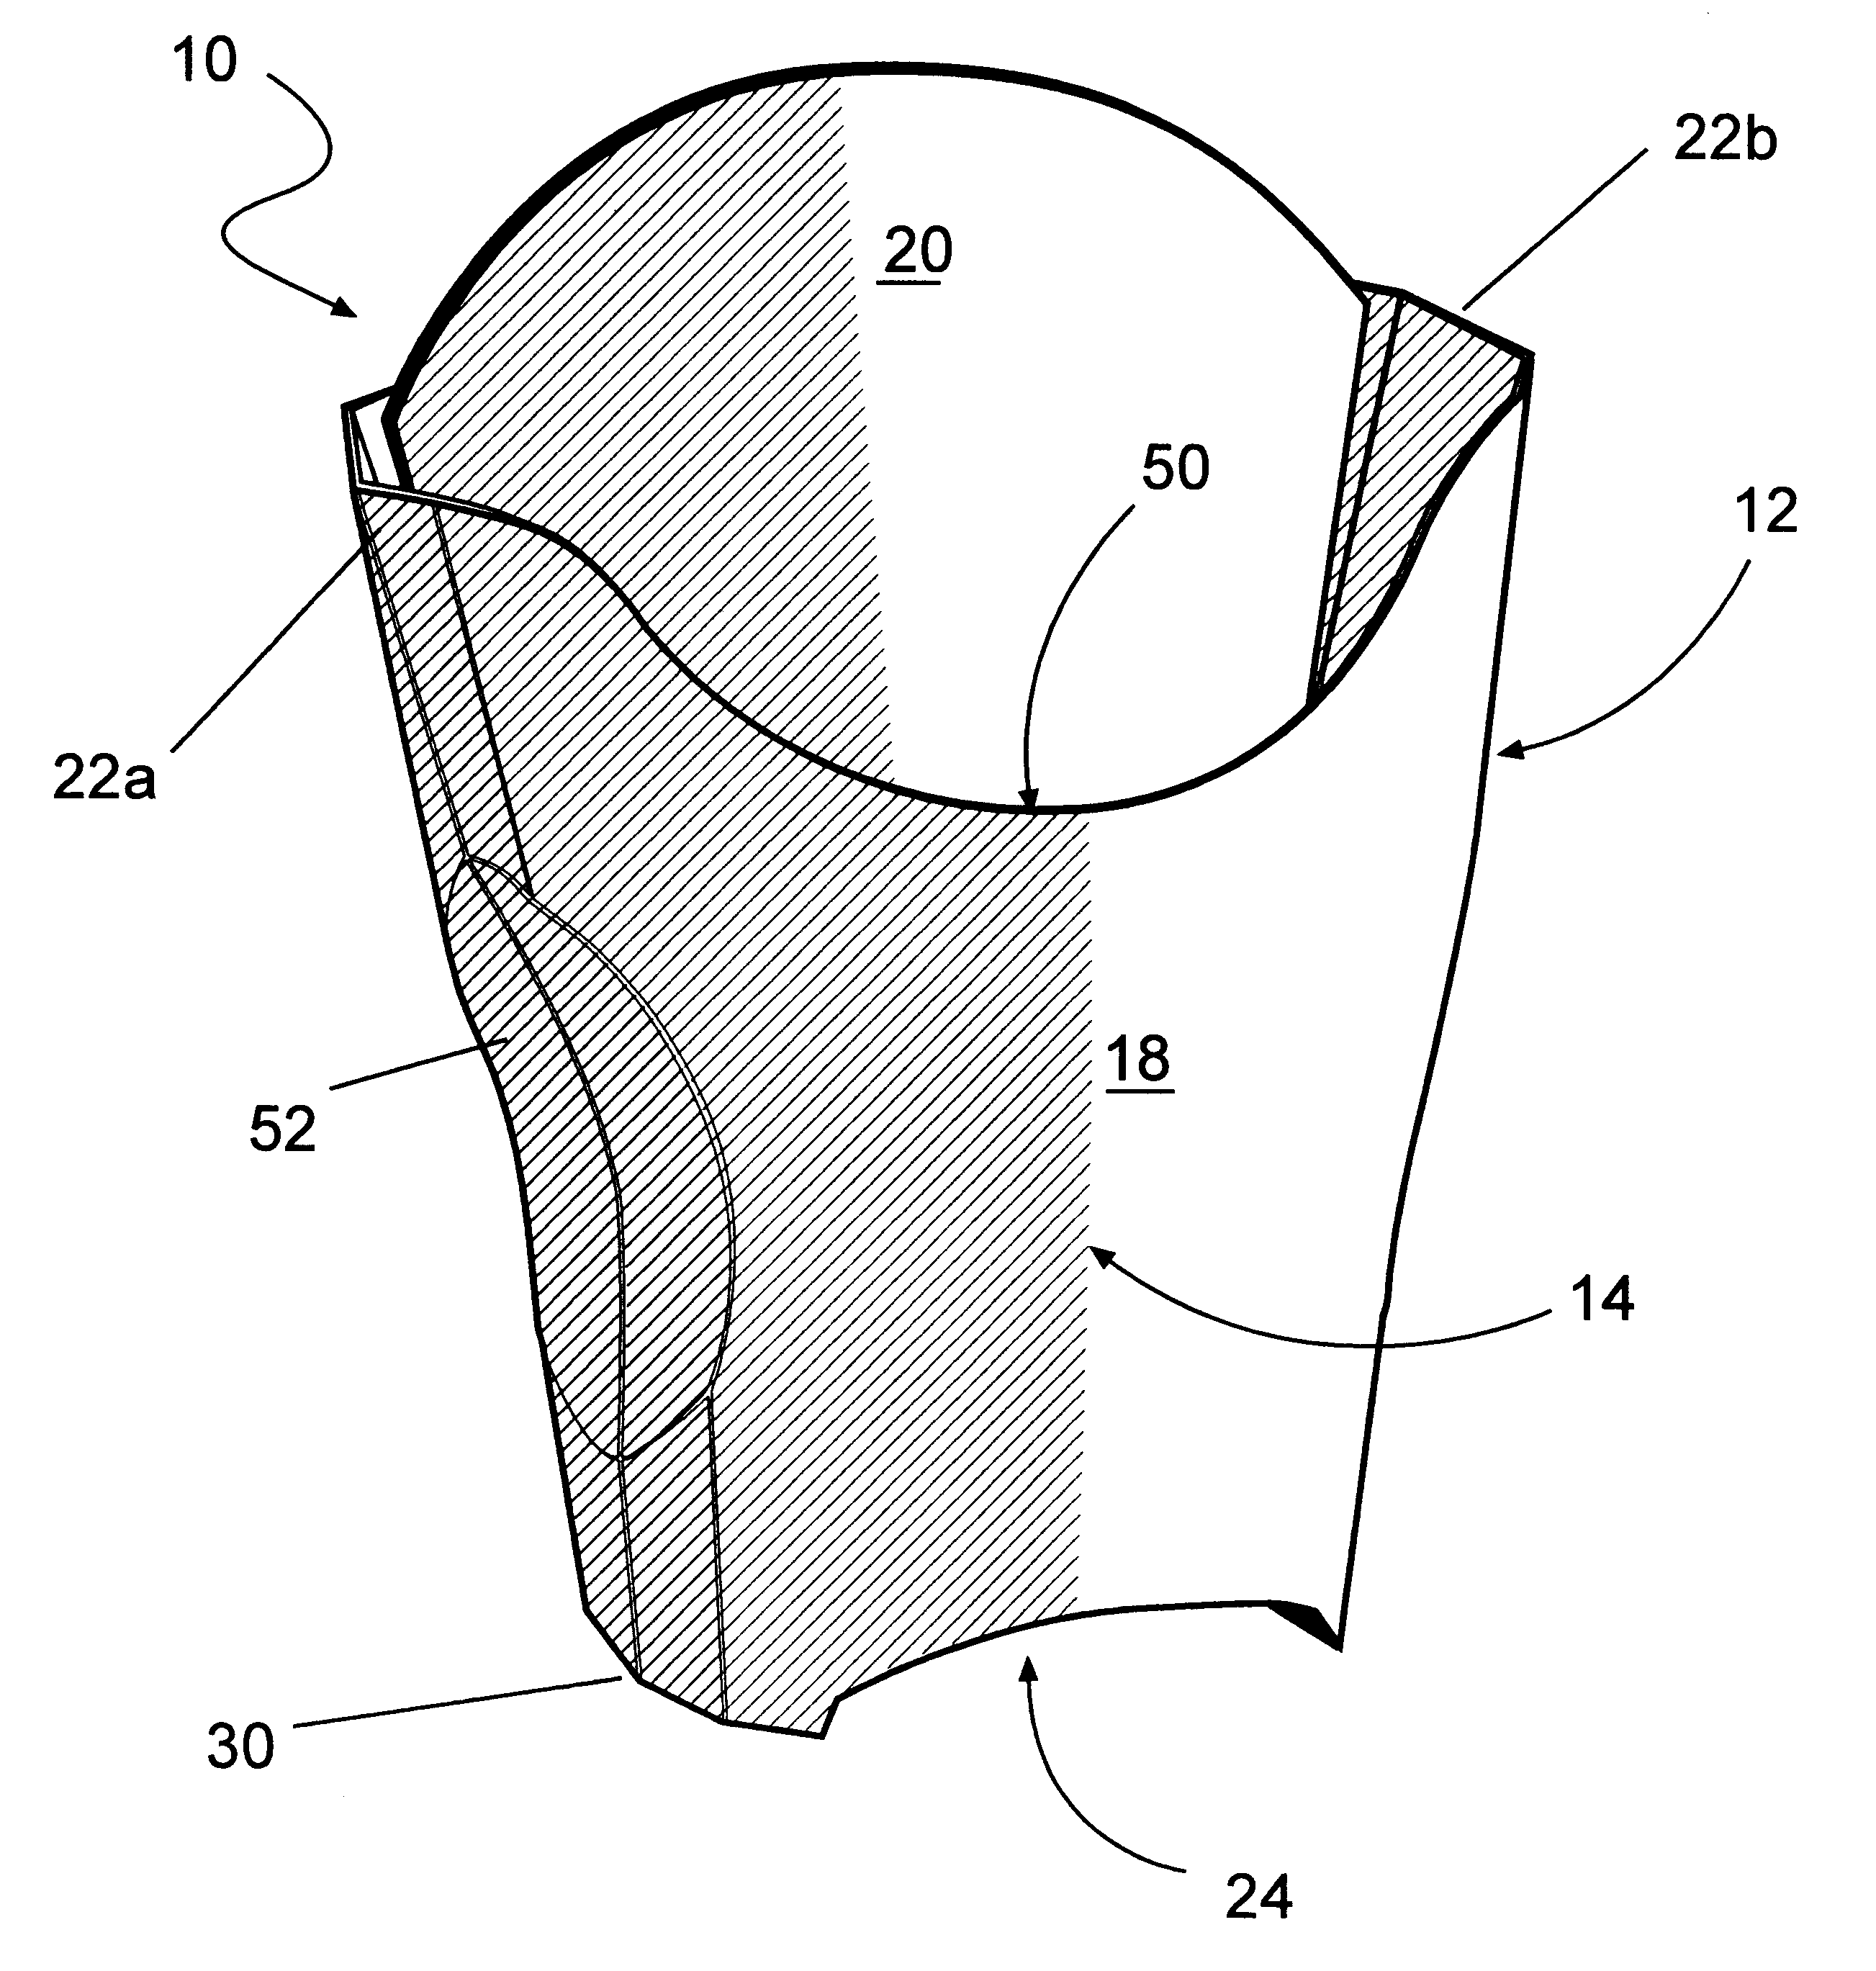 Collapsible container for holding foodstuffs, and methods of using same